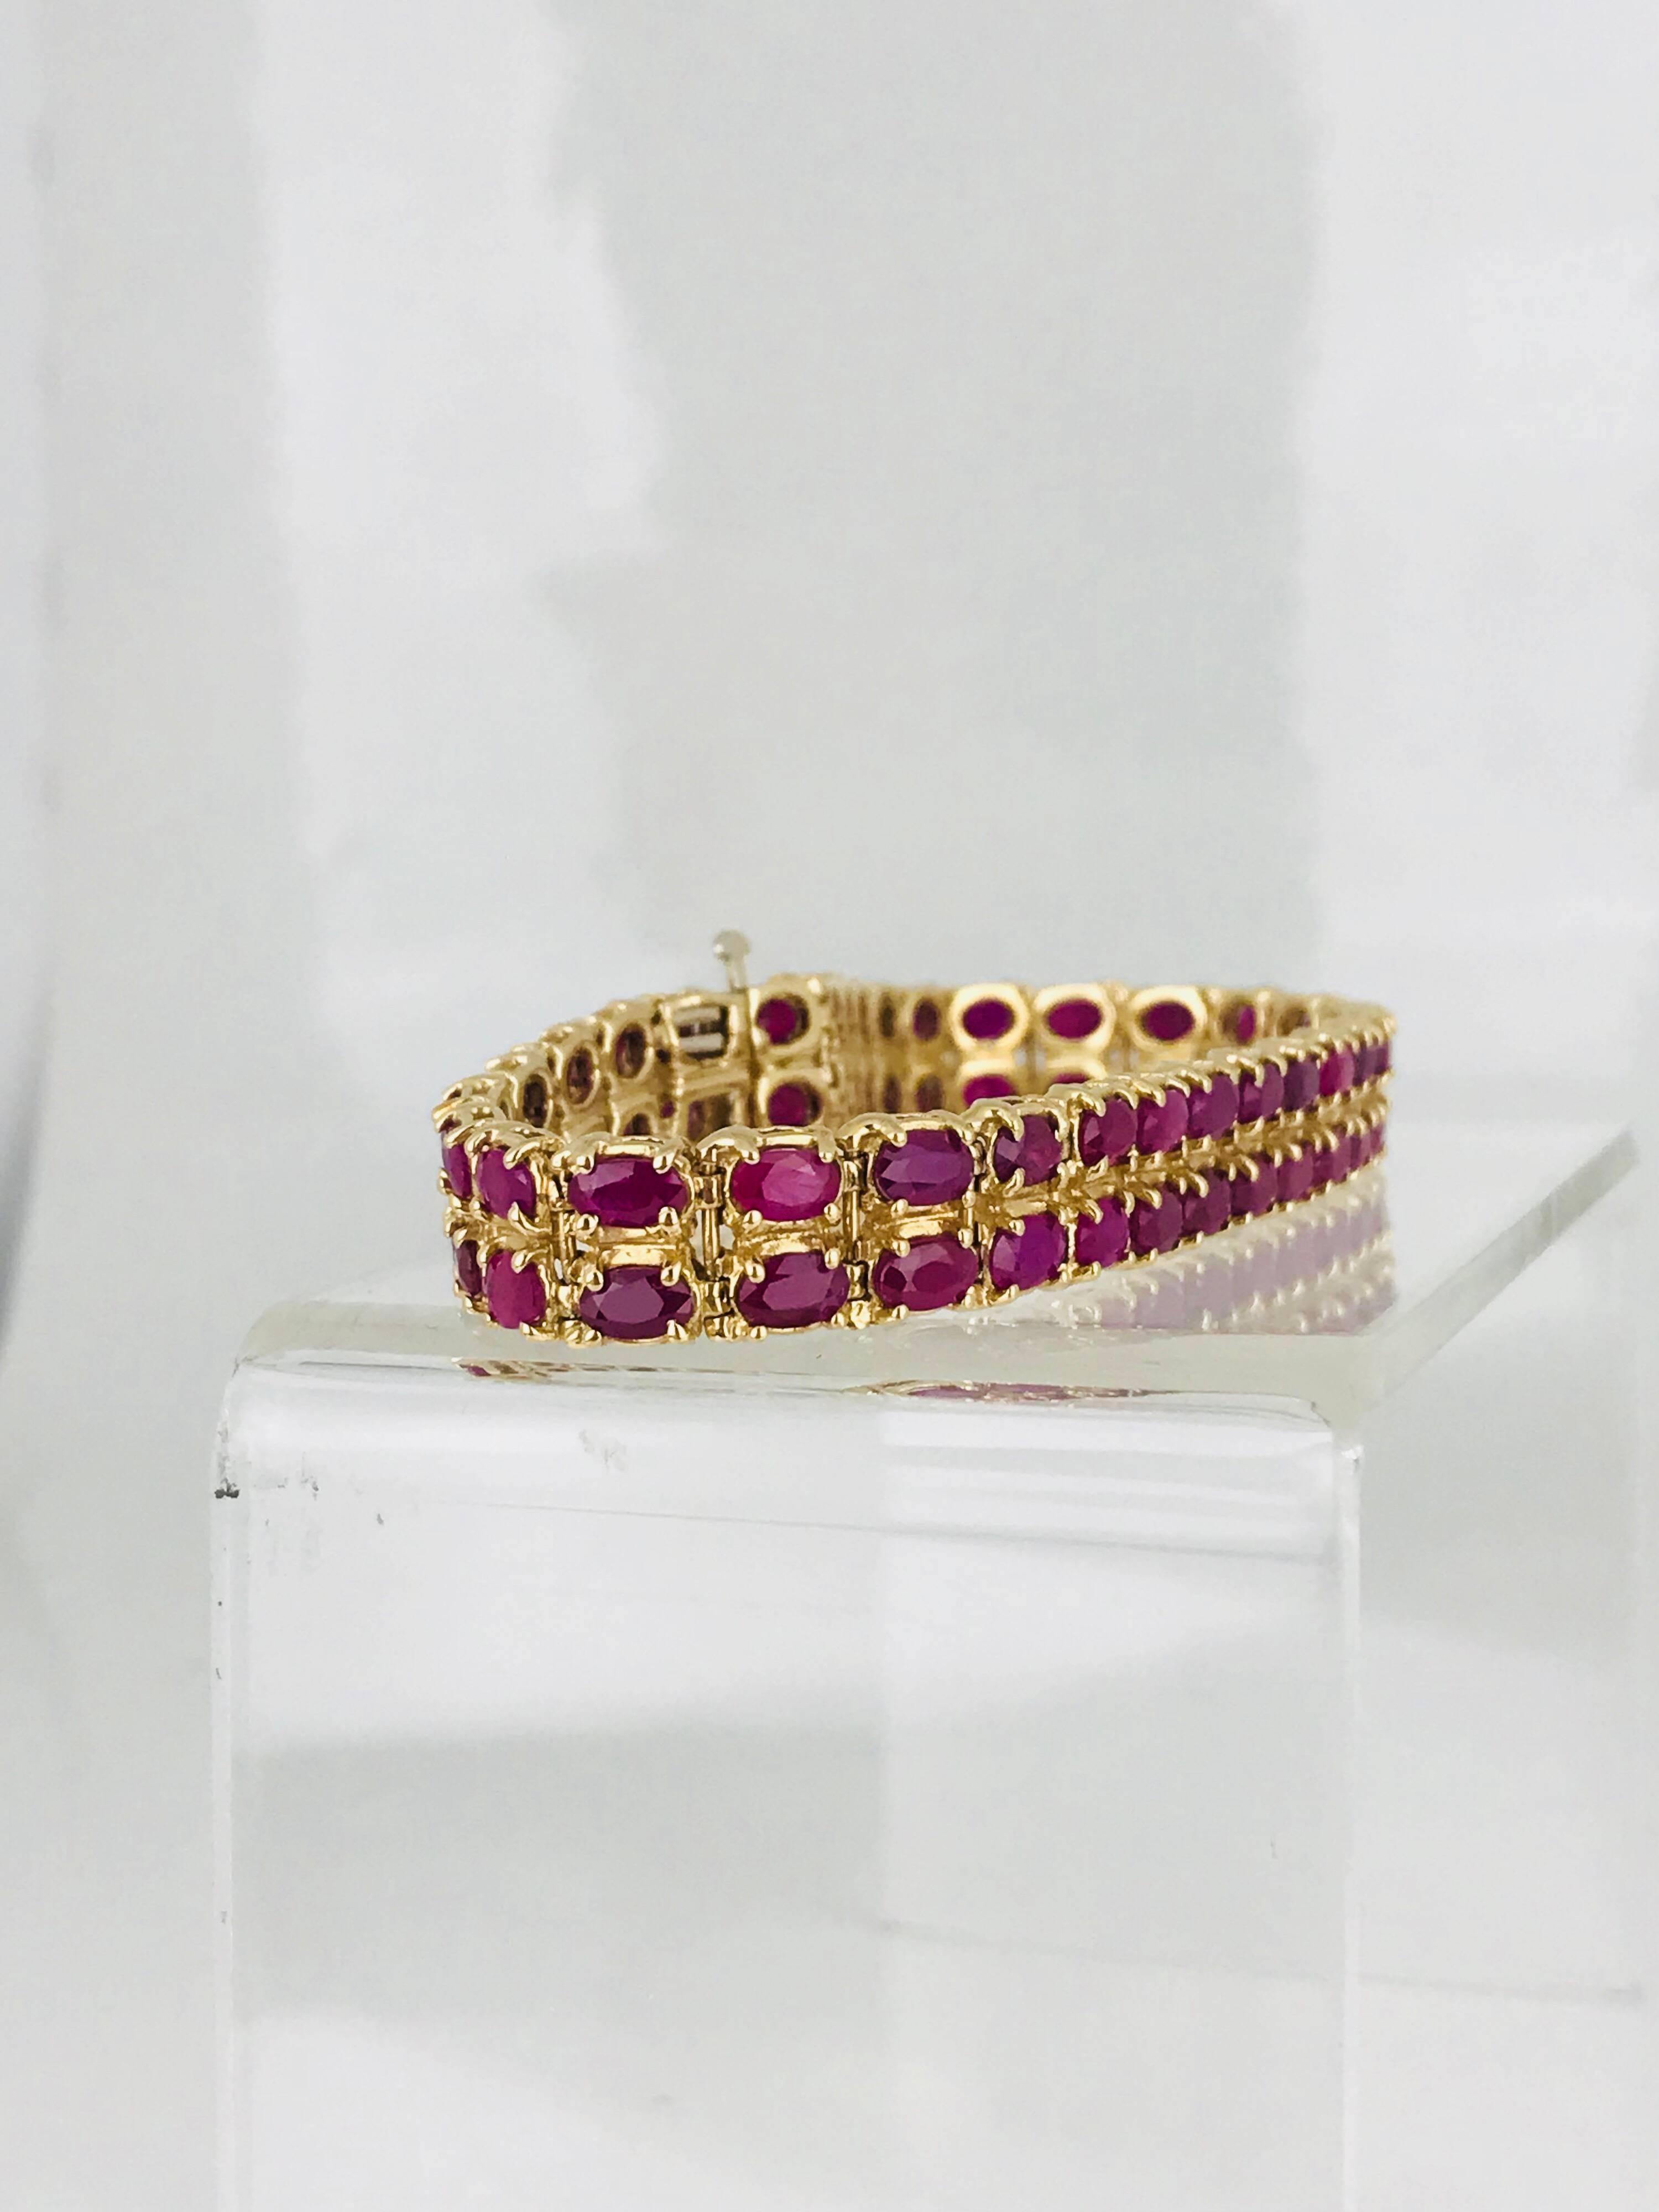 Burma Ruby Bracelet, consists of (62) oval shaped rubies measuring 2.80 x 4.50 millimeters in diameter. The total weight of rubies is estimated to be 25 carats.
Colors are deep ruby red .
7.5 inches in length.

GIA Gemologist inspected and evaluated